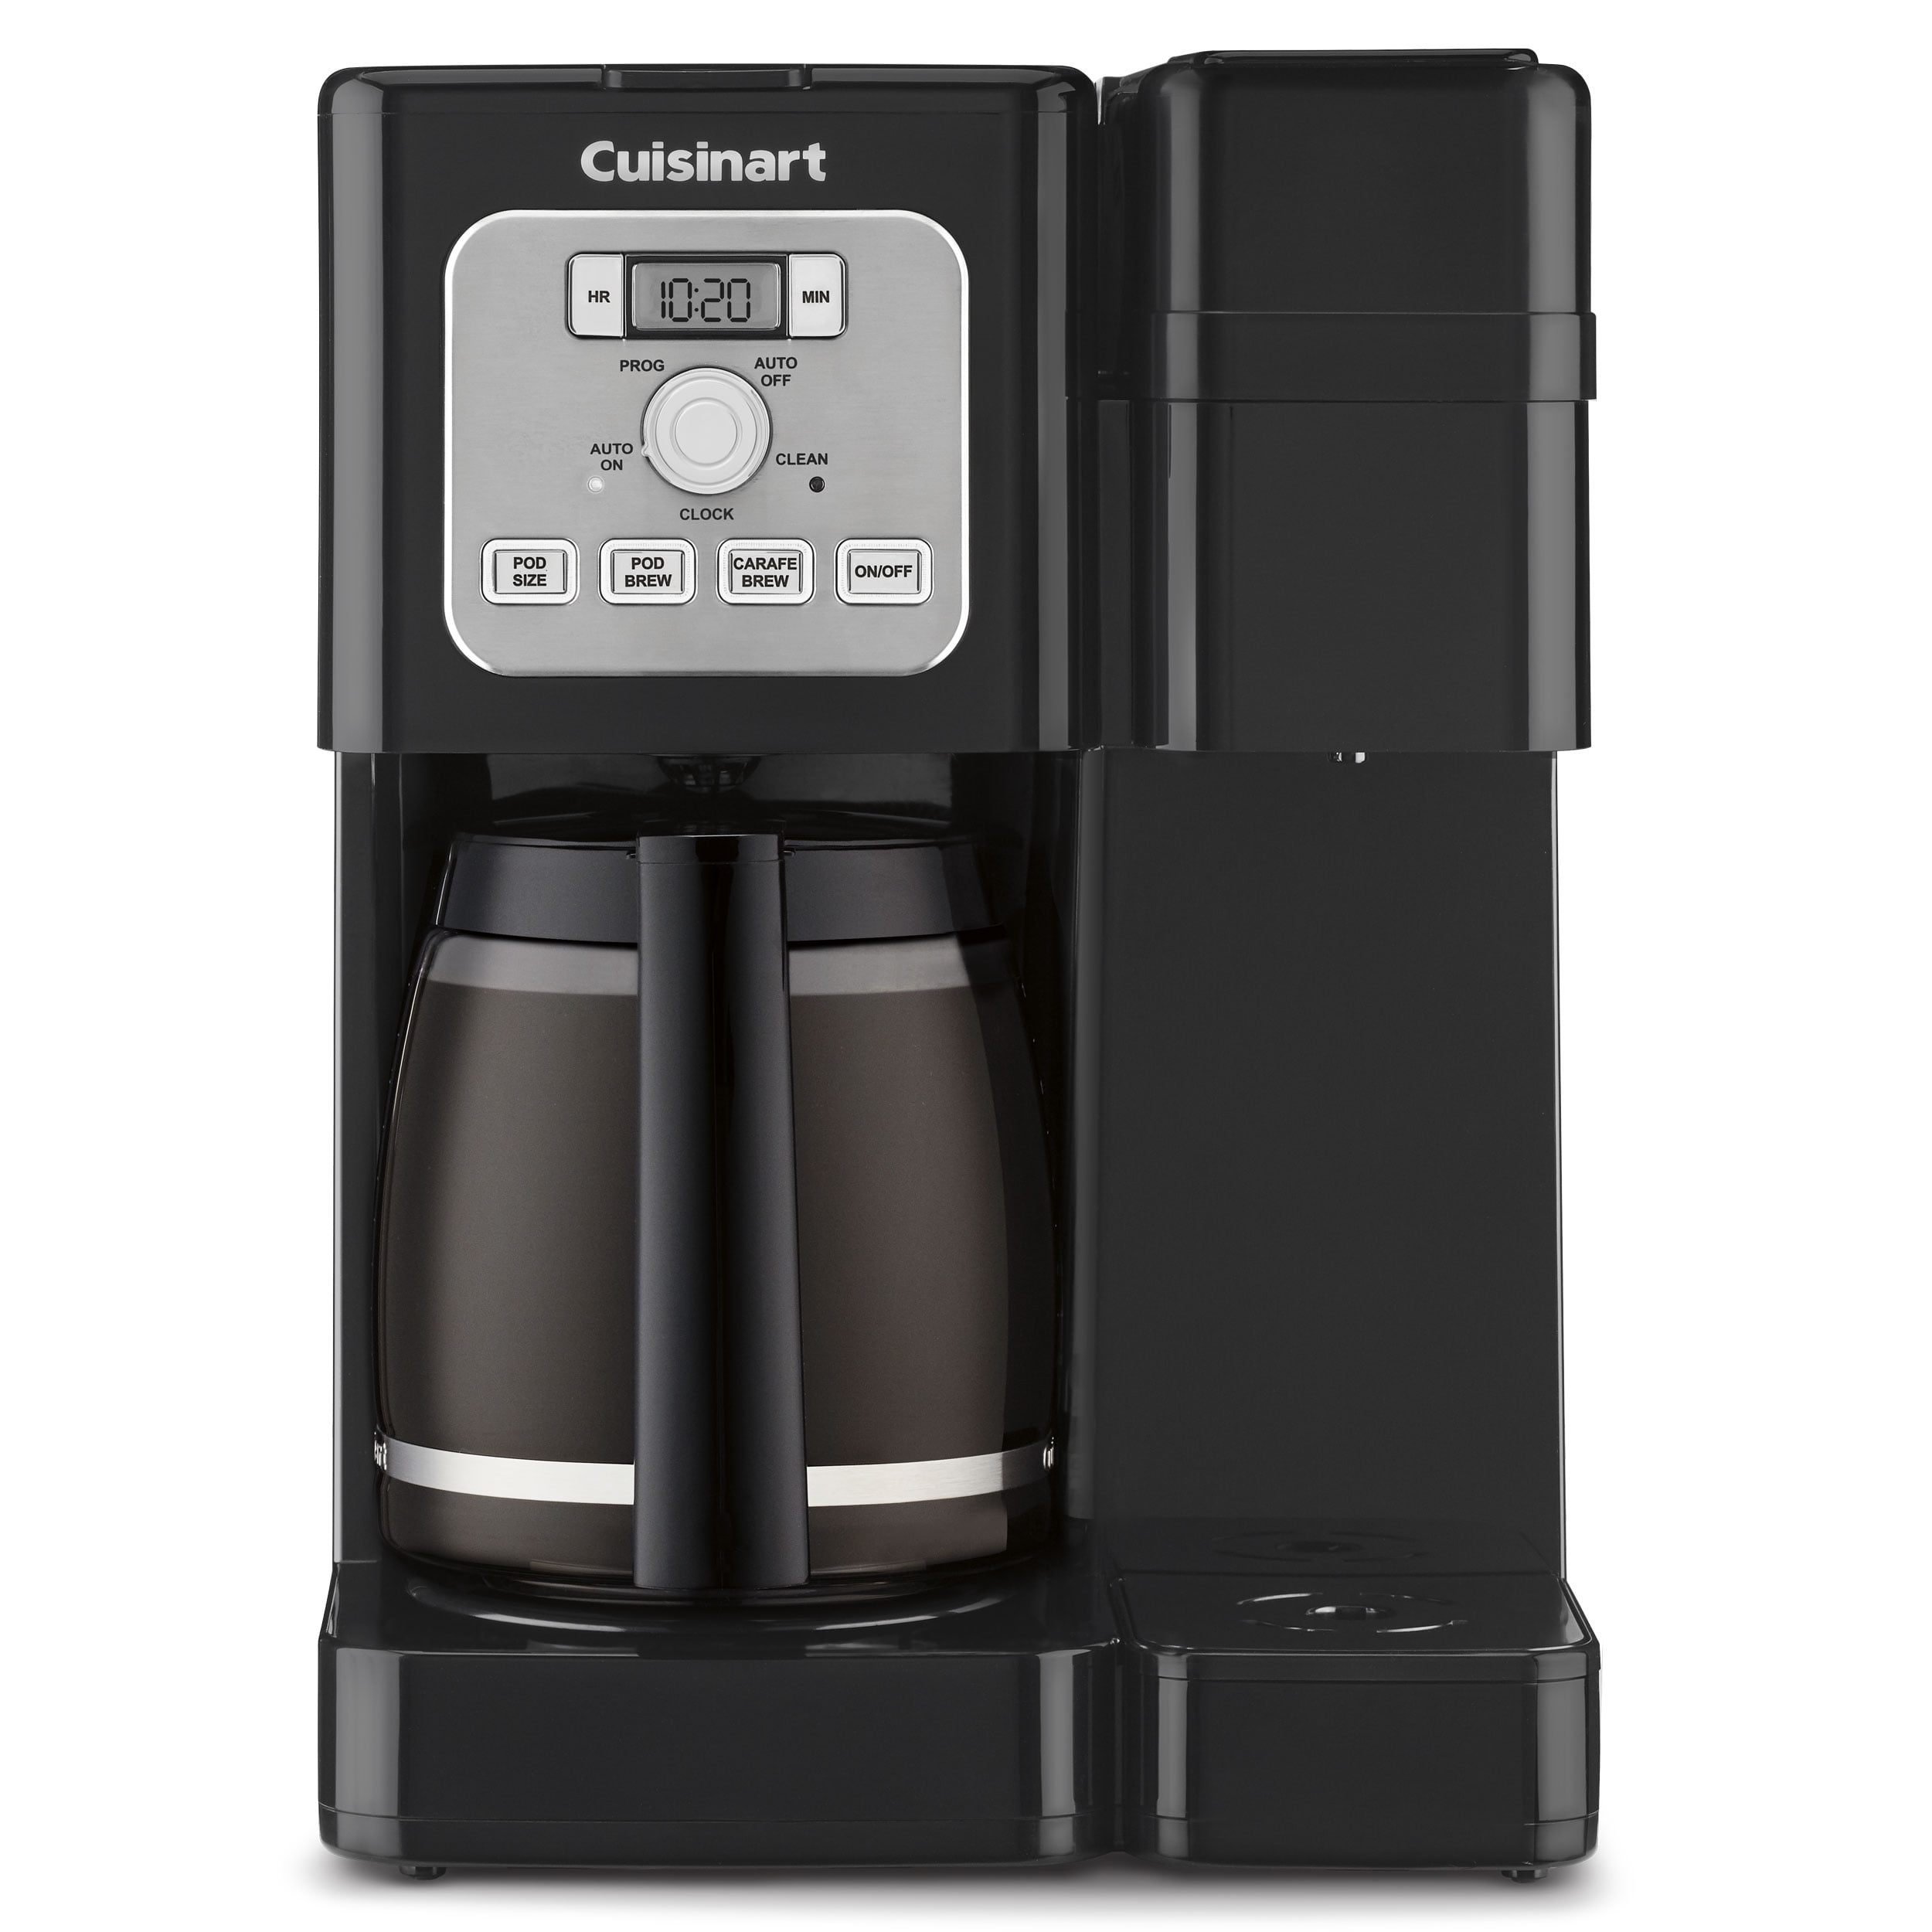 Cuisinart BRU 2-Cup Coffeemaker - Black with Stainless Steel